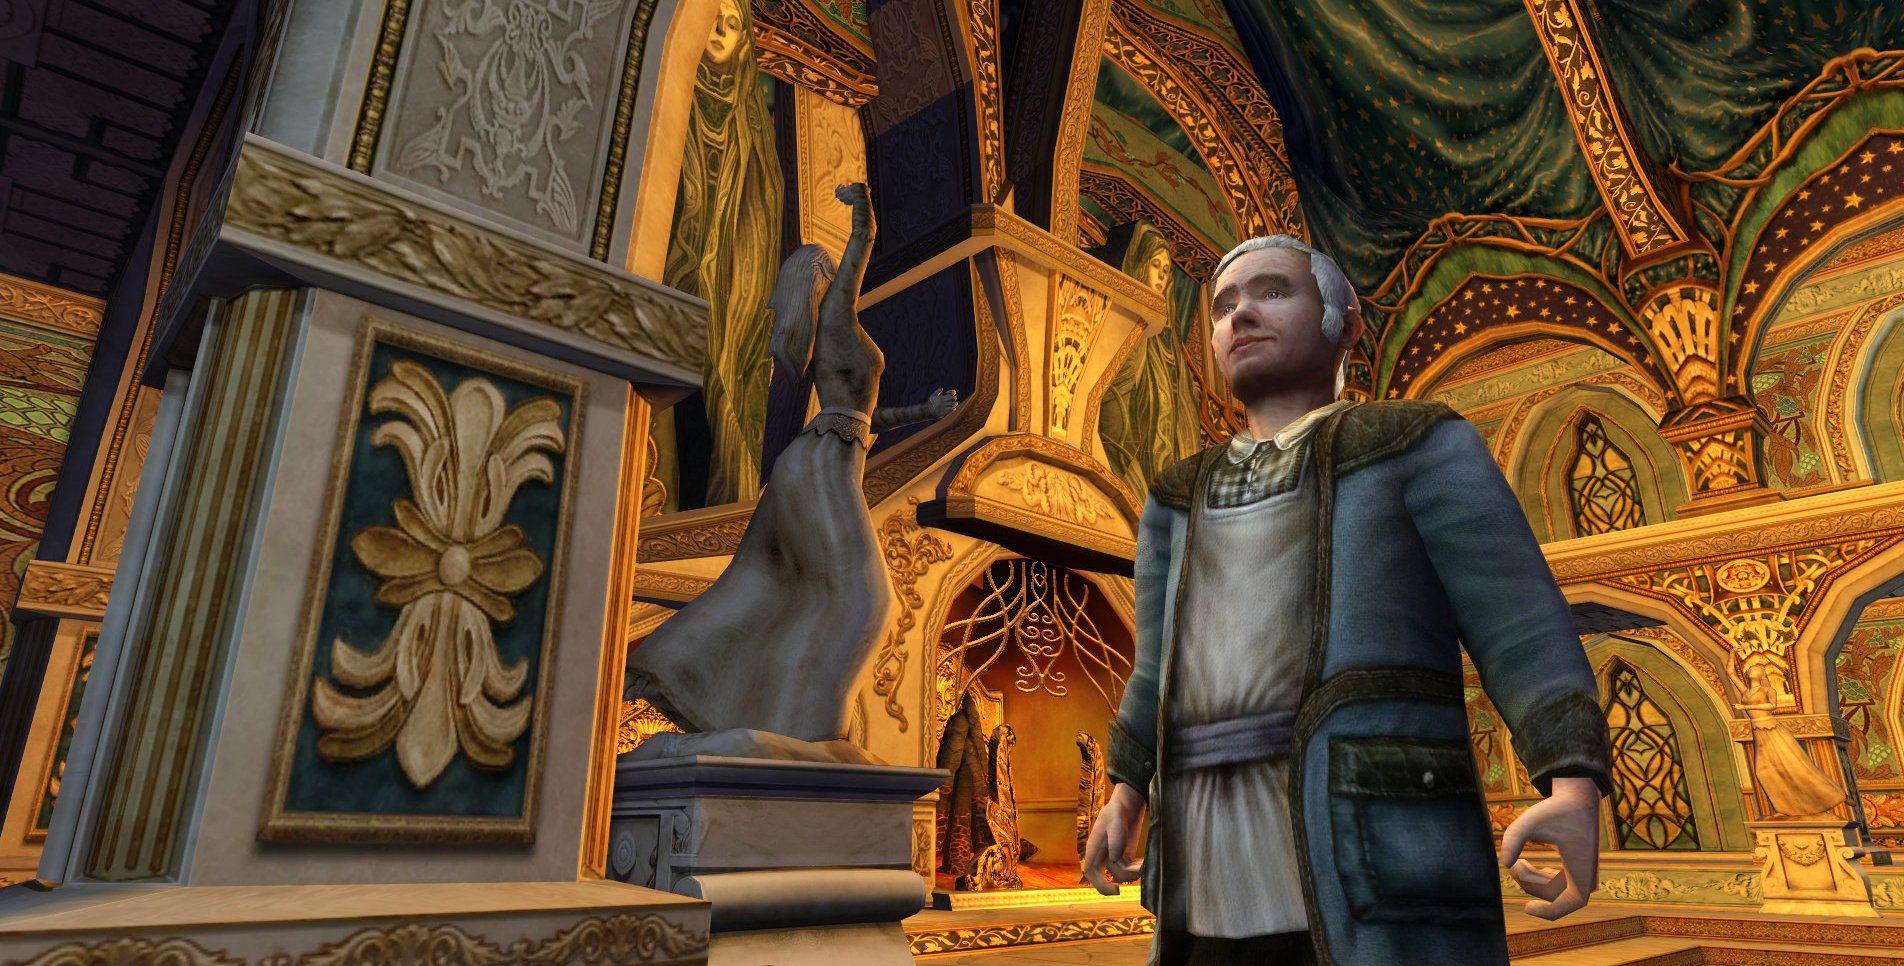 LOTRO Events Calendar 2021 - Schedule of Events, Festivals & Boosts